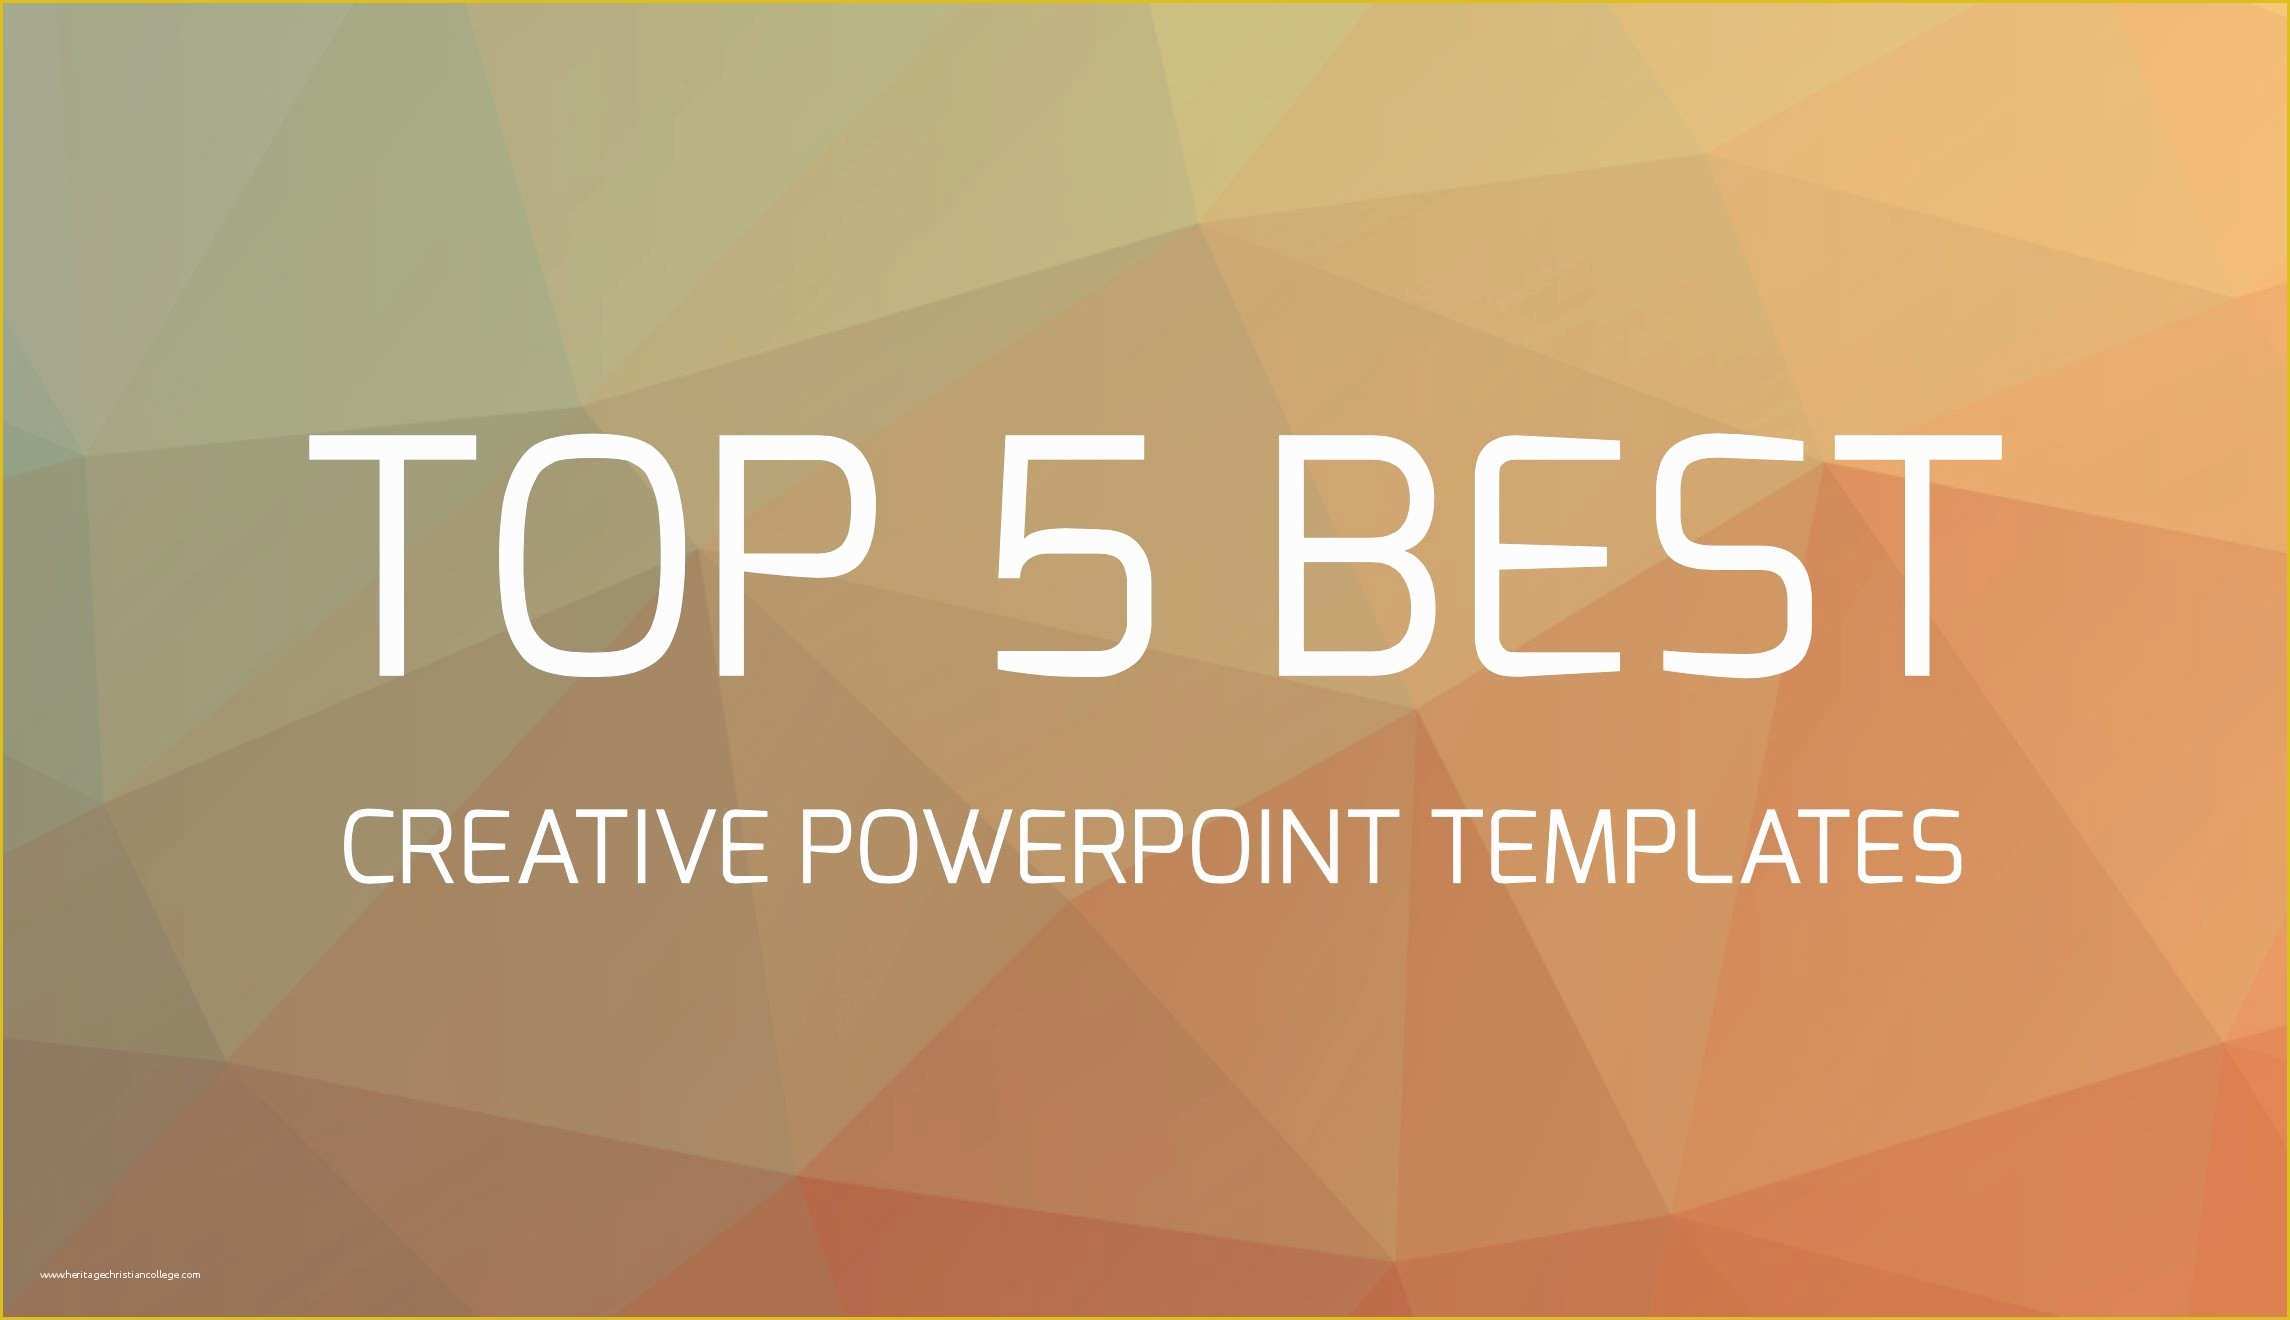 Best Powerpoint Templates Free Of 42 Cool Powerpoint Backgrounds ·①